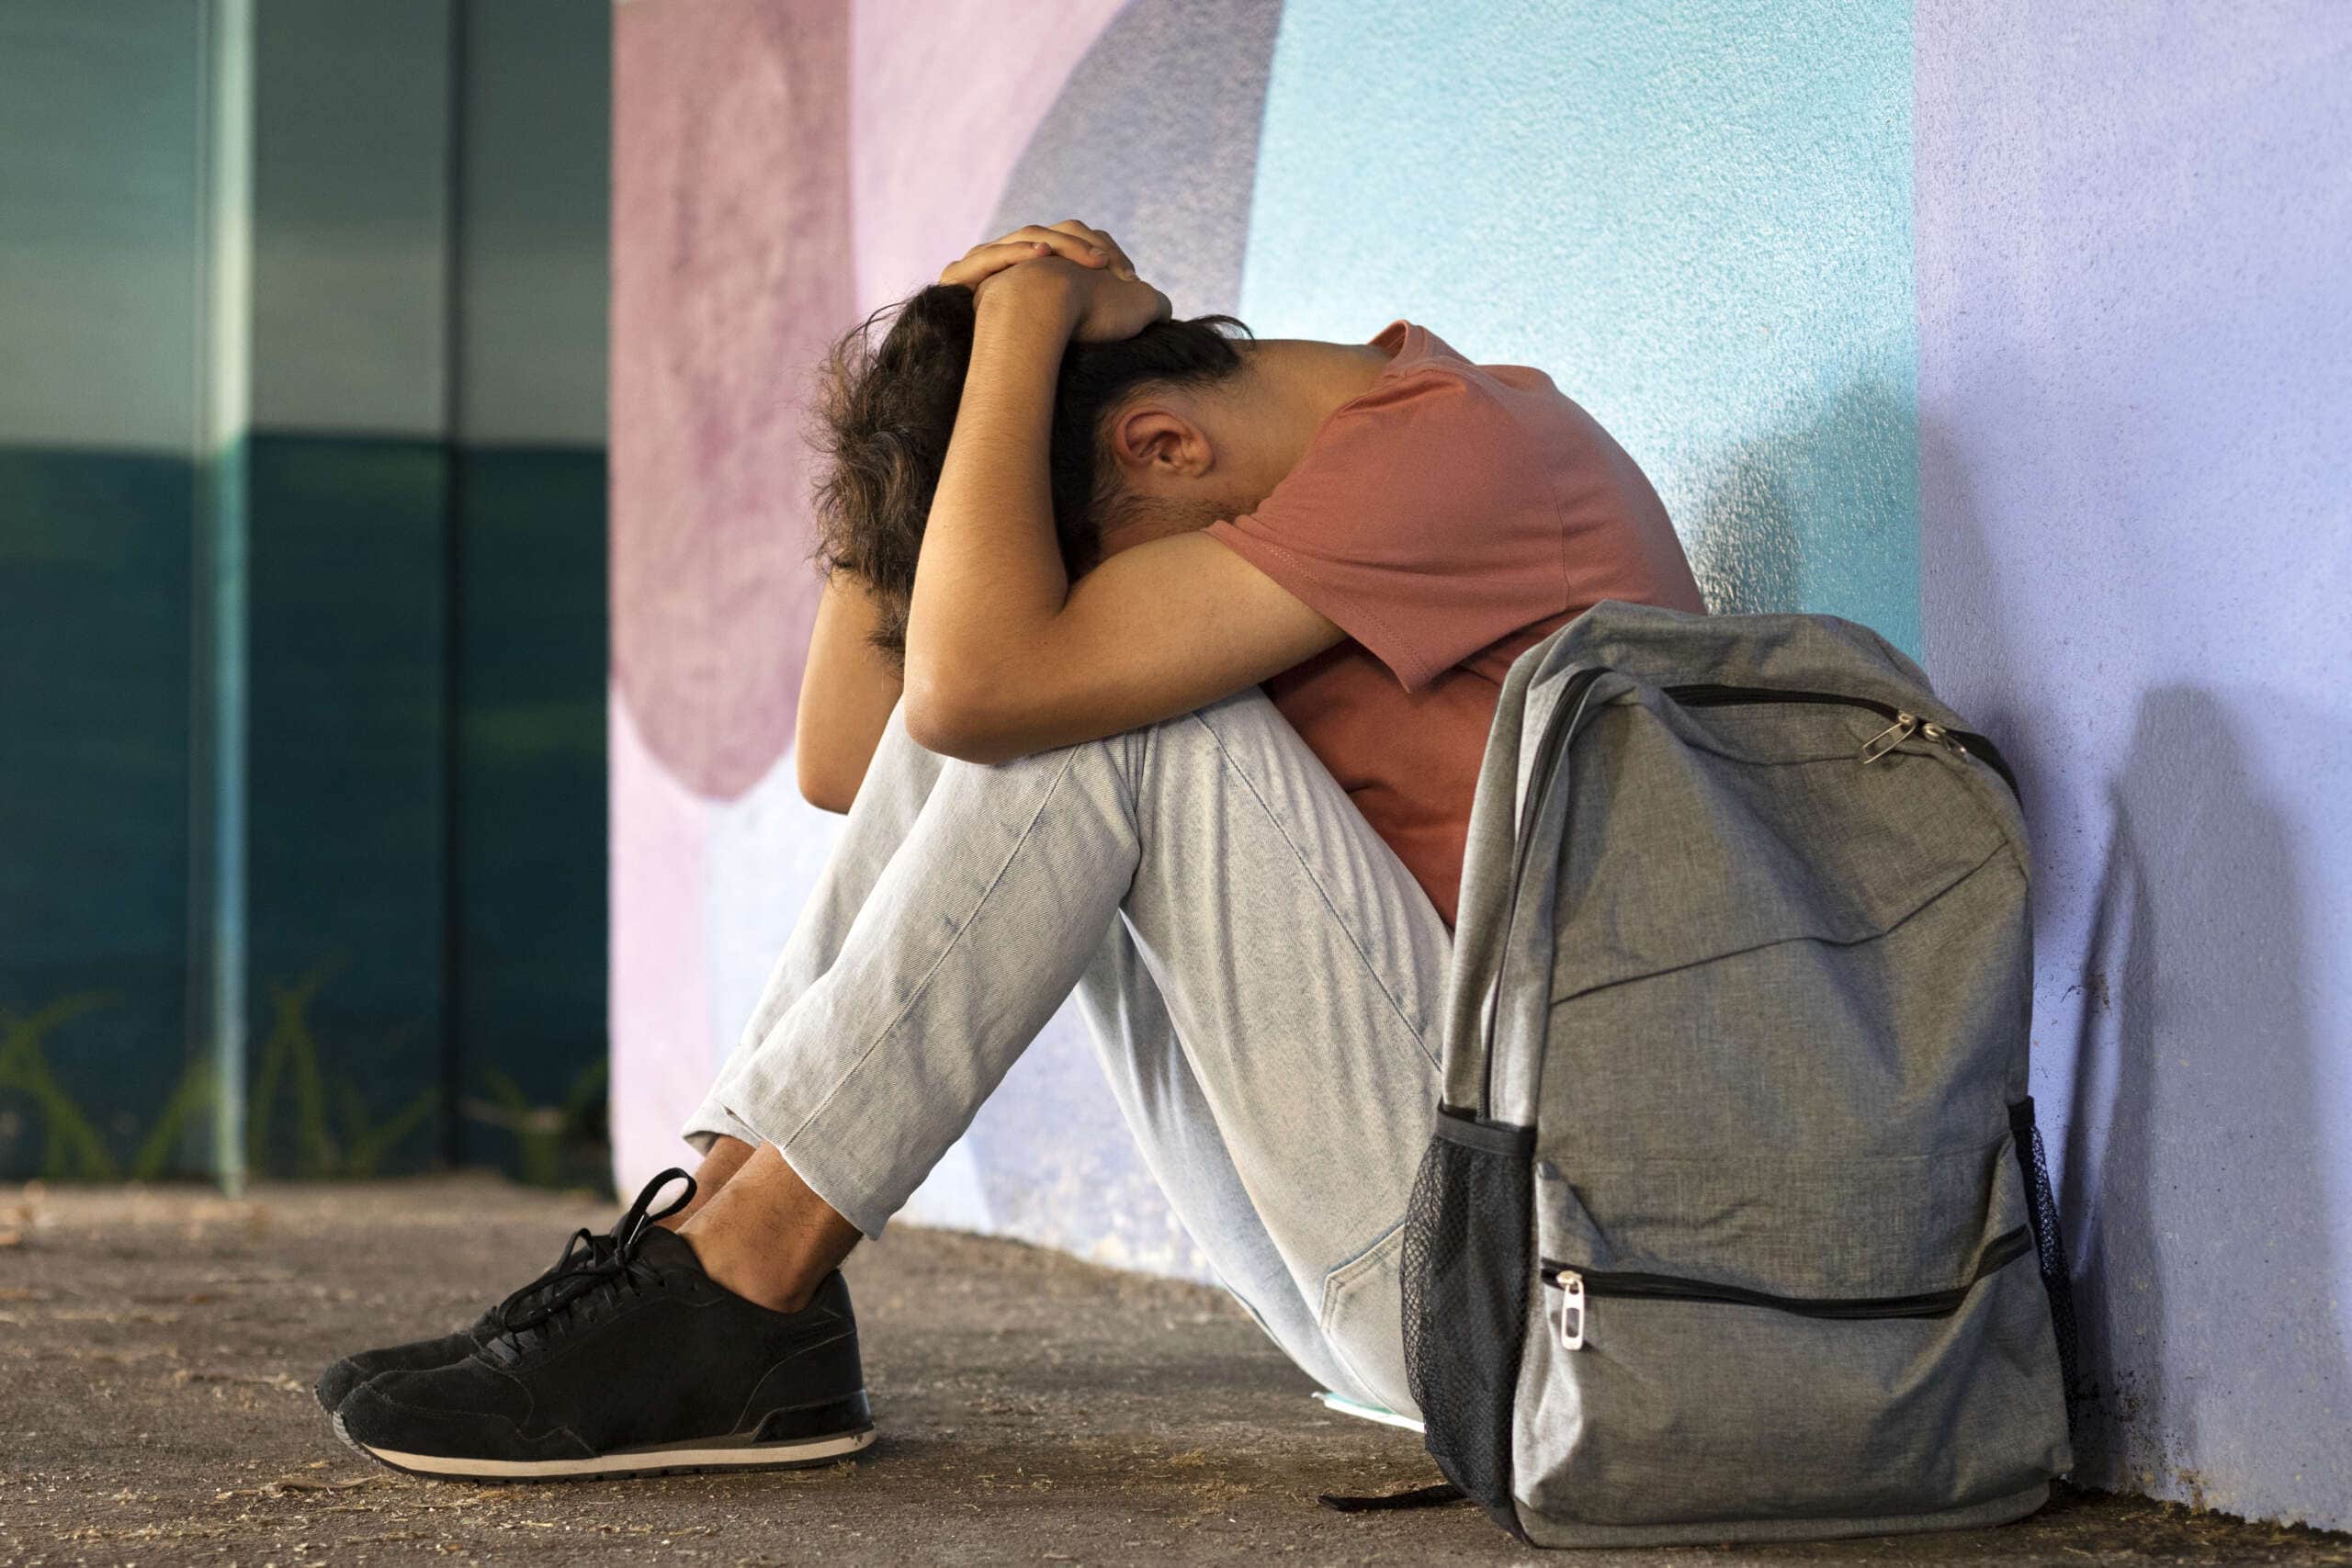 A young man sitting on the ground with his backpack, exhibiting signs of anxiety.